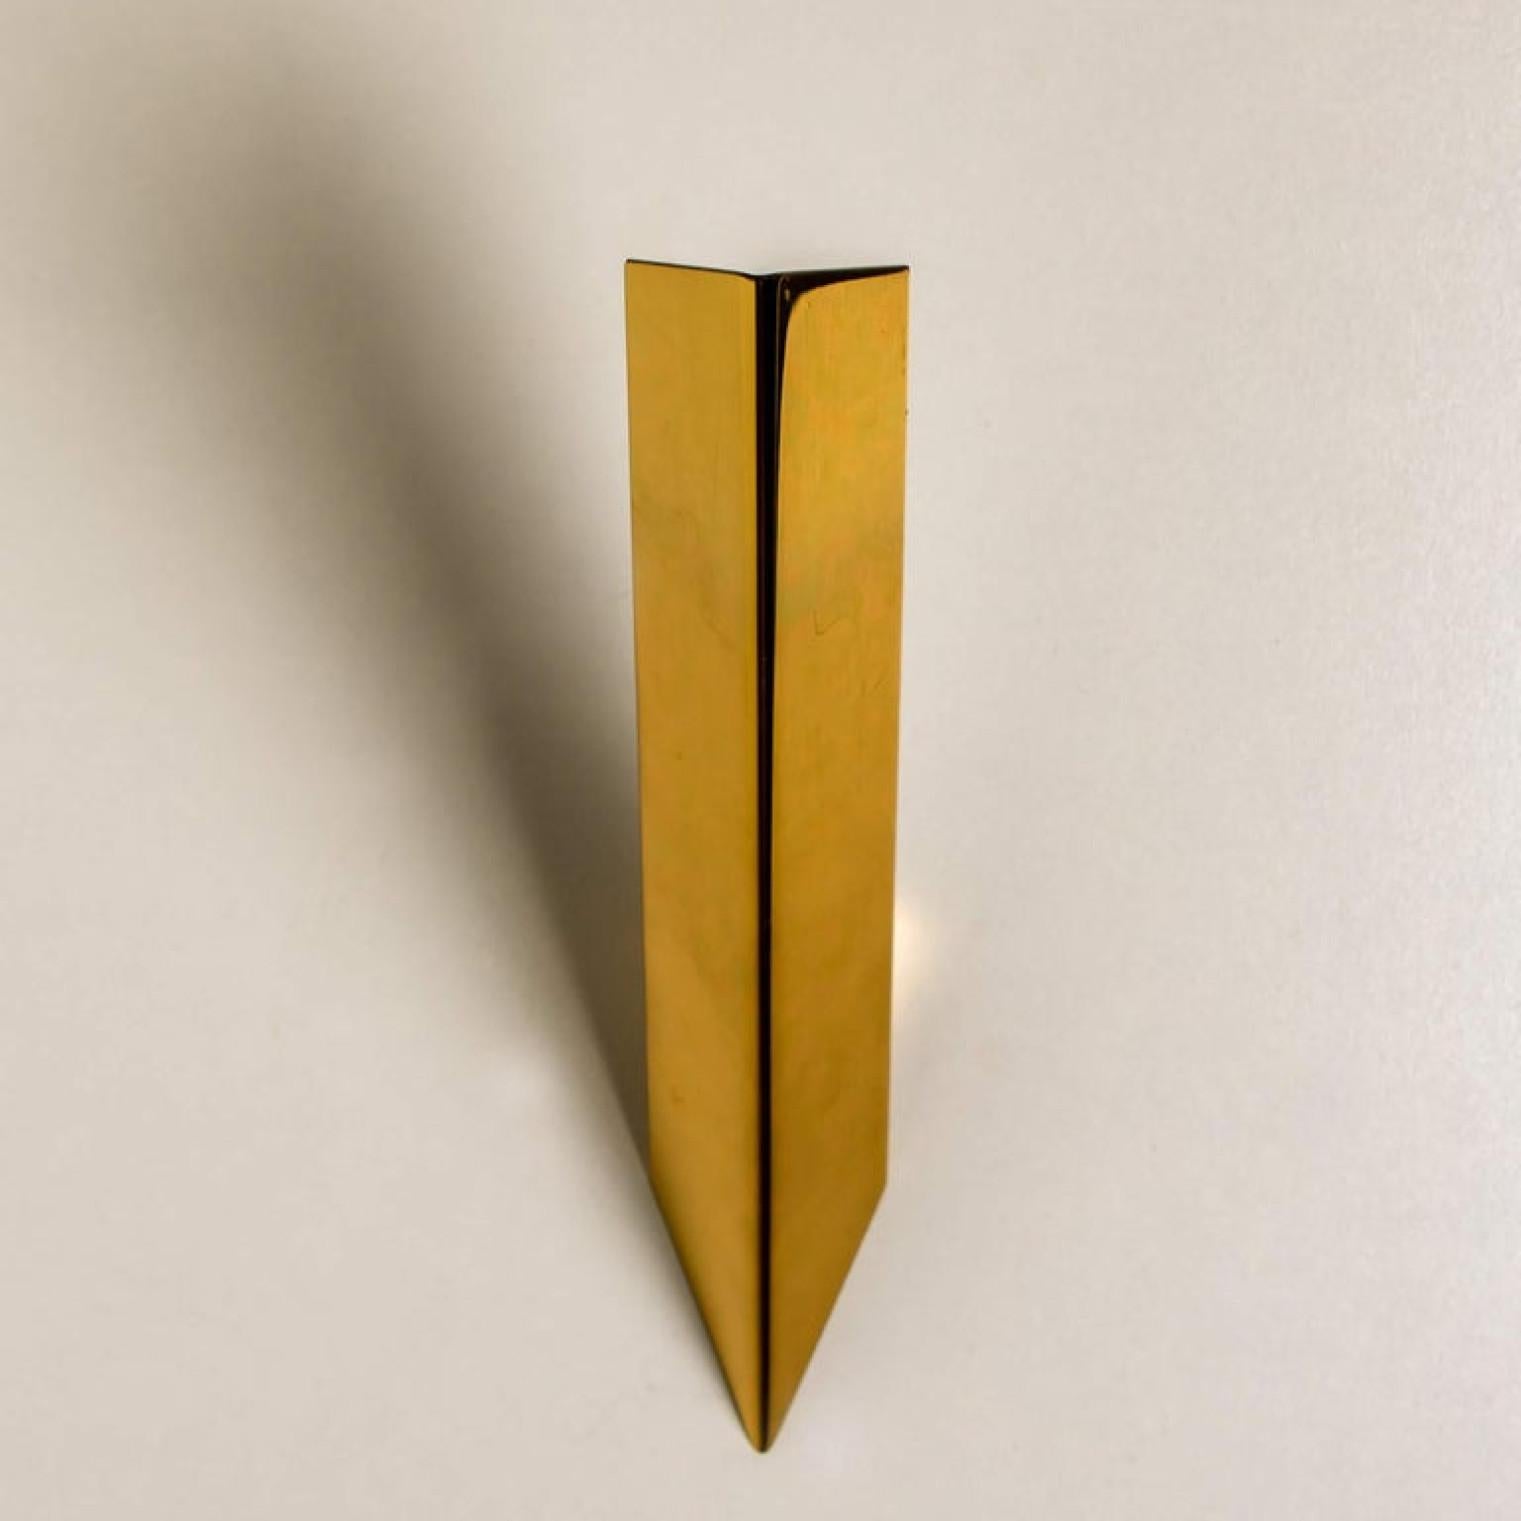 Pair of Wedge-Shaped High End Wall Lights by J.T. Kalmar, 1970s, Austria For Sale 2